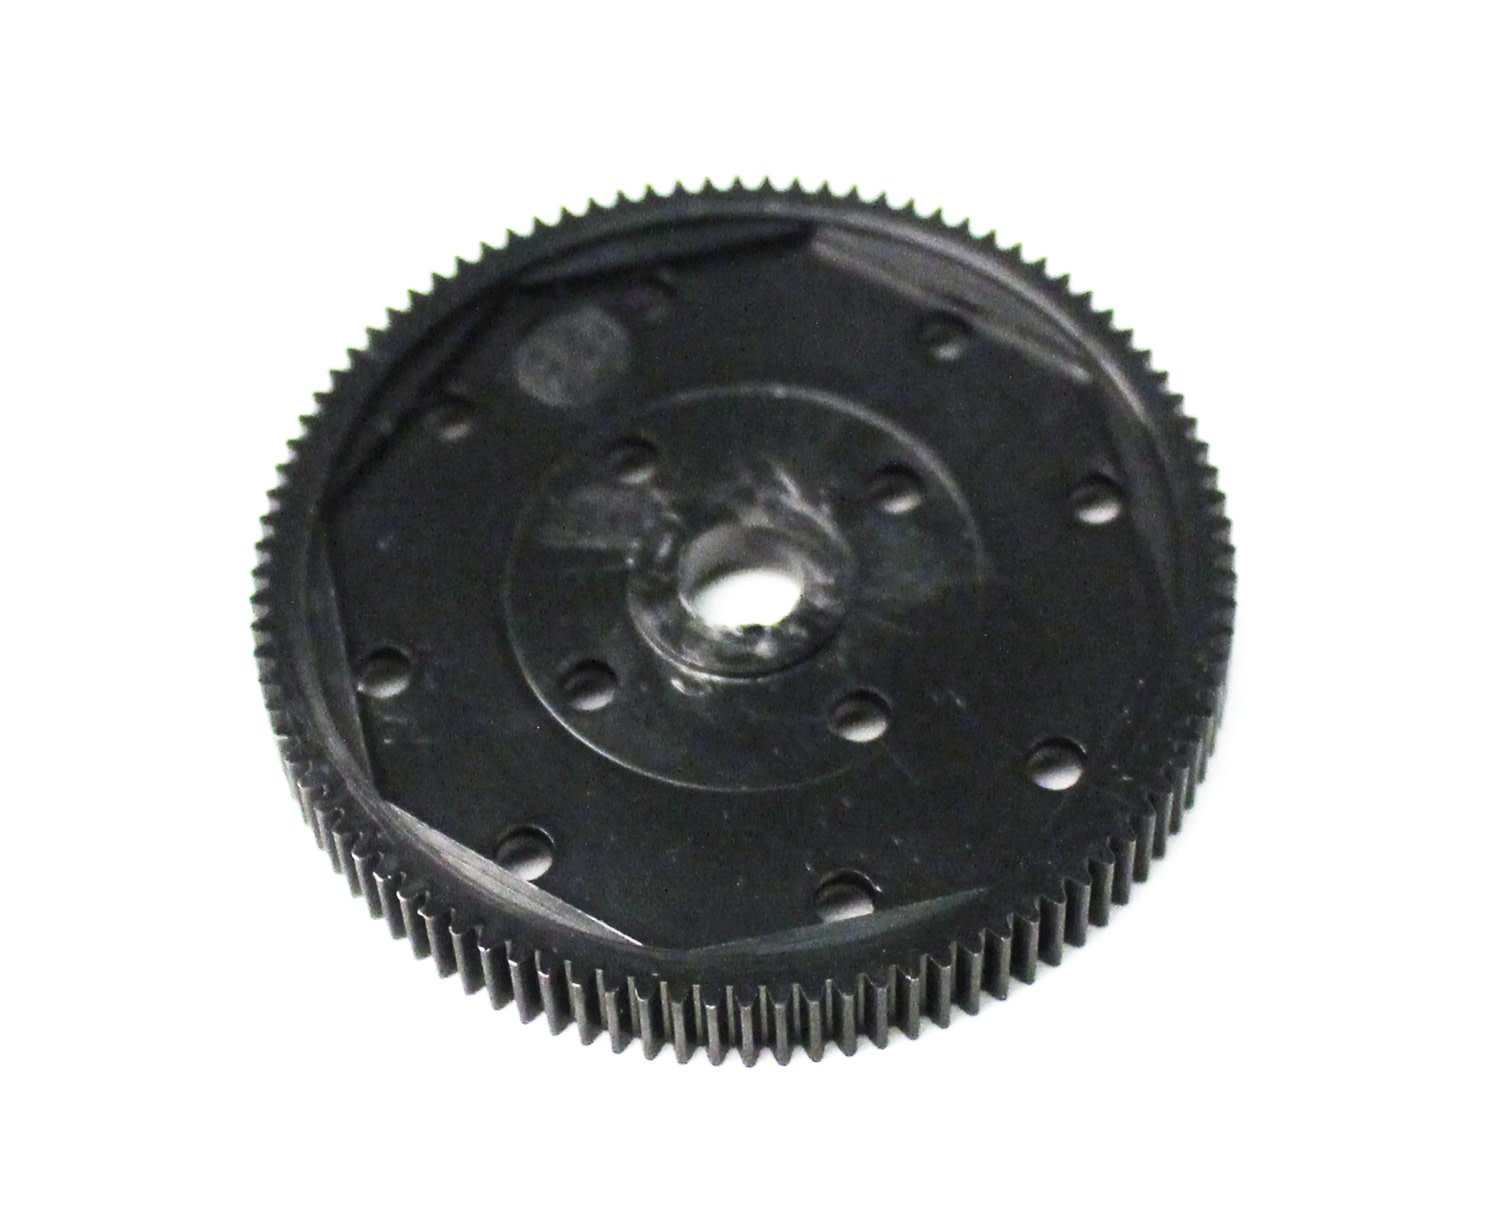 Kimbrough KIM317 96 Tooth 64 Pitch Slipper Gear for B6, SC10